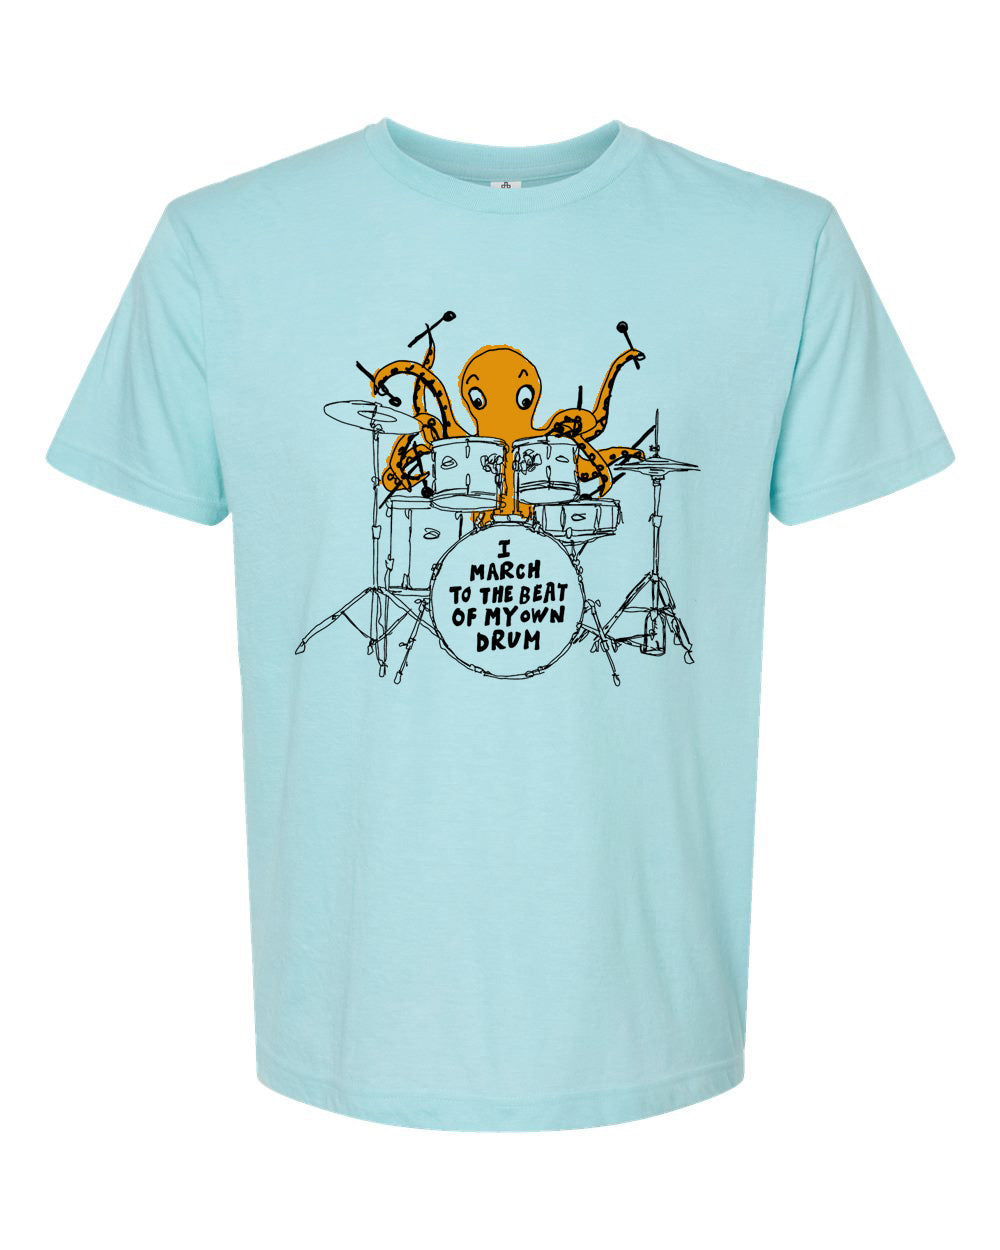 Drum (I March to the Beat of my own Drum) Octopus : Unisex Tee